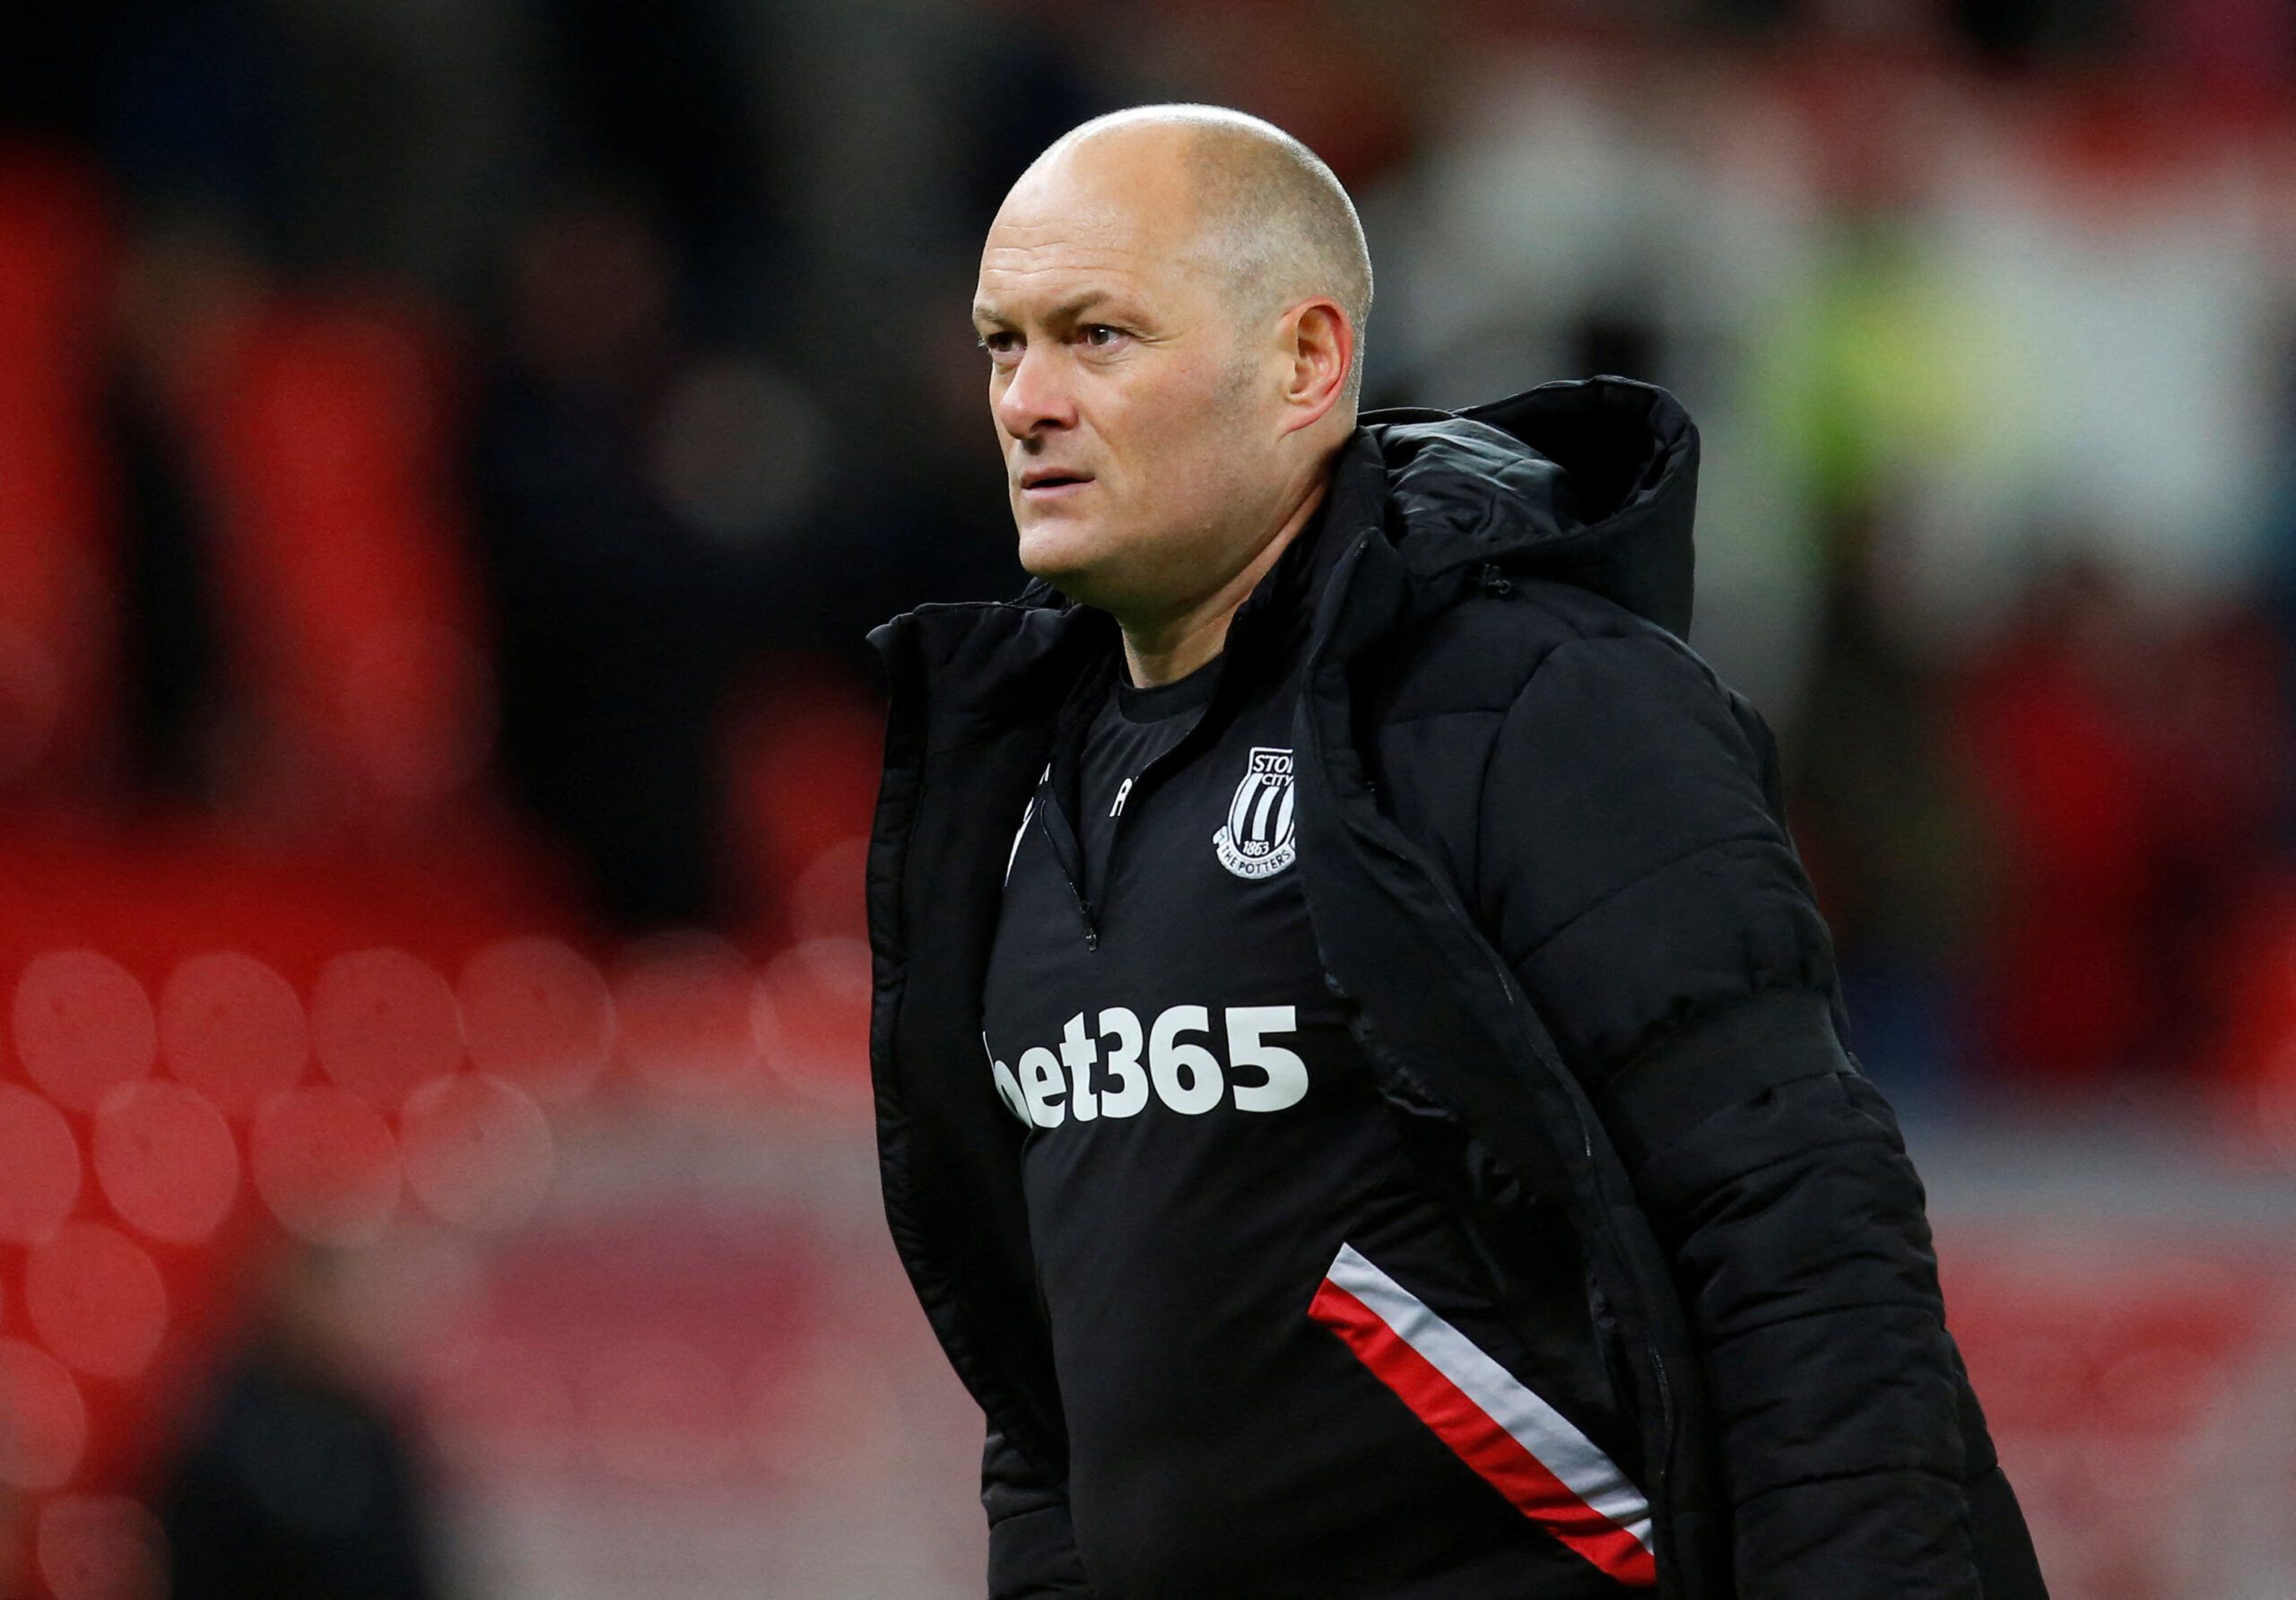 Soccer Football - Championship - Stoke City v Burnley - bet365 Stadium, Stoke-on-Trent, Britain - December 30, 2022 Stoke City manager Alex Neil looks dejected after the match   Action Images/Ed Sykes  EDITORIAL USE ONLY. No use with unauthorized audio, video, data, fixture lists, club/league logos or 